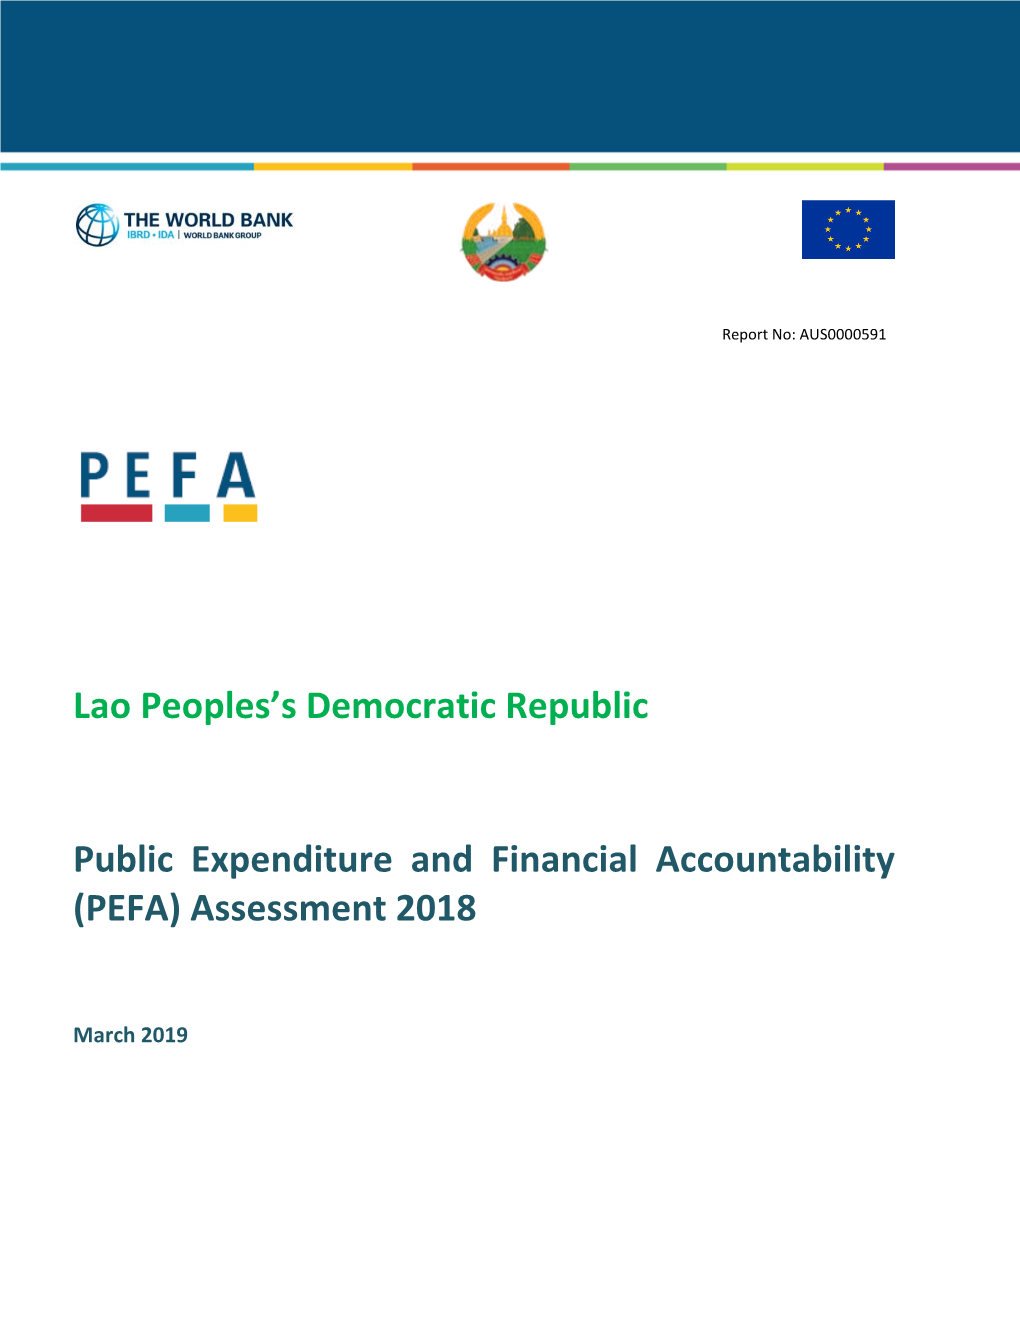 Lao Peoples's Democratic Republic Public Expenditure and Financial Accountability (PEFA) Assessment 2018